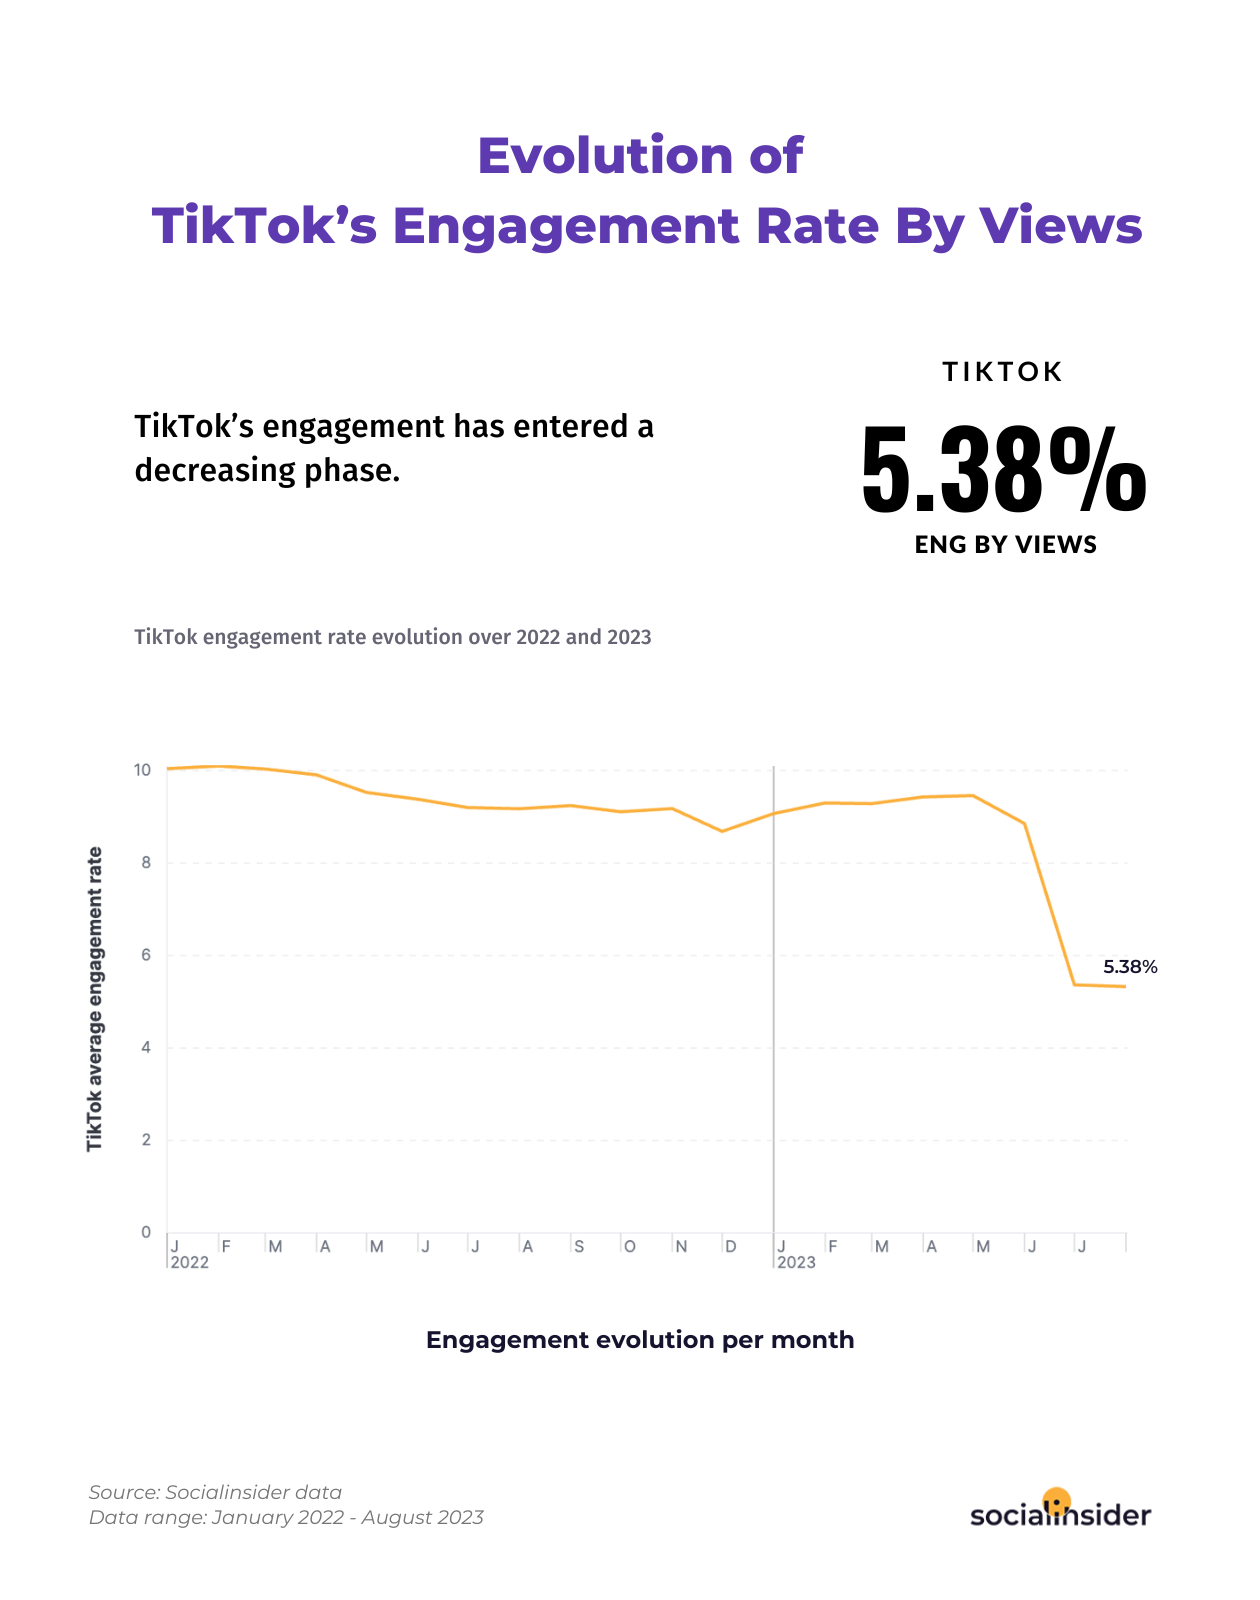 Here is a chart showing how TikTok's engagement has evolved over the past two years.